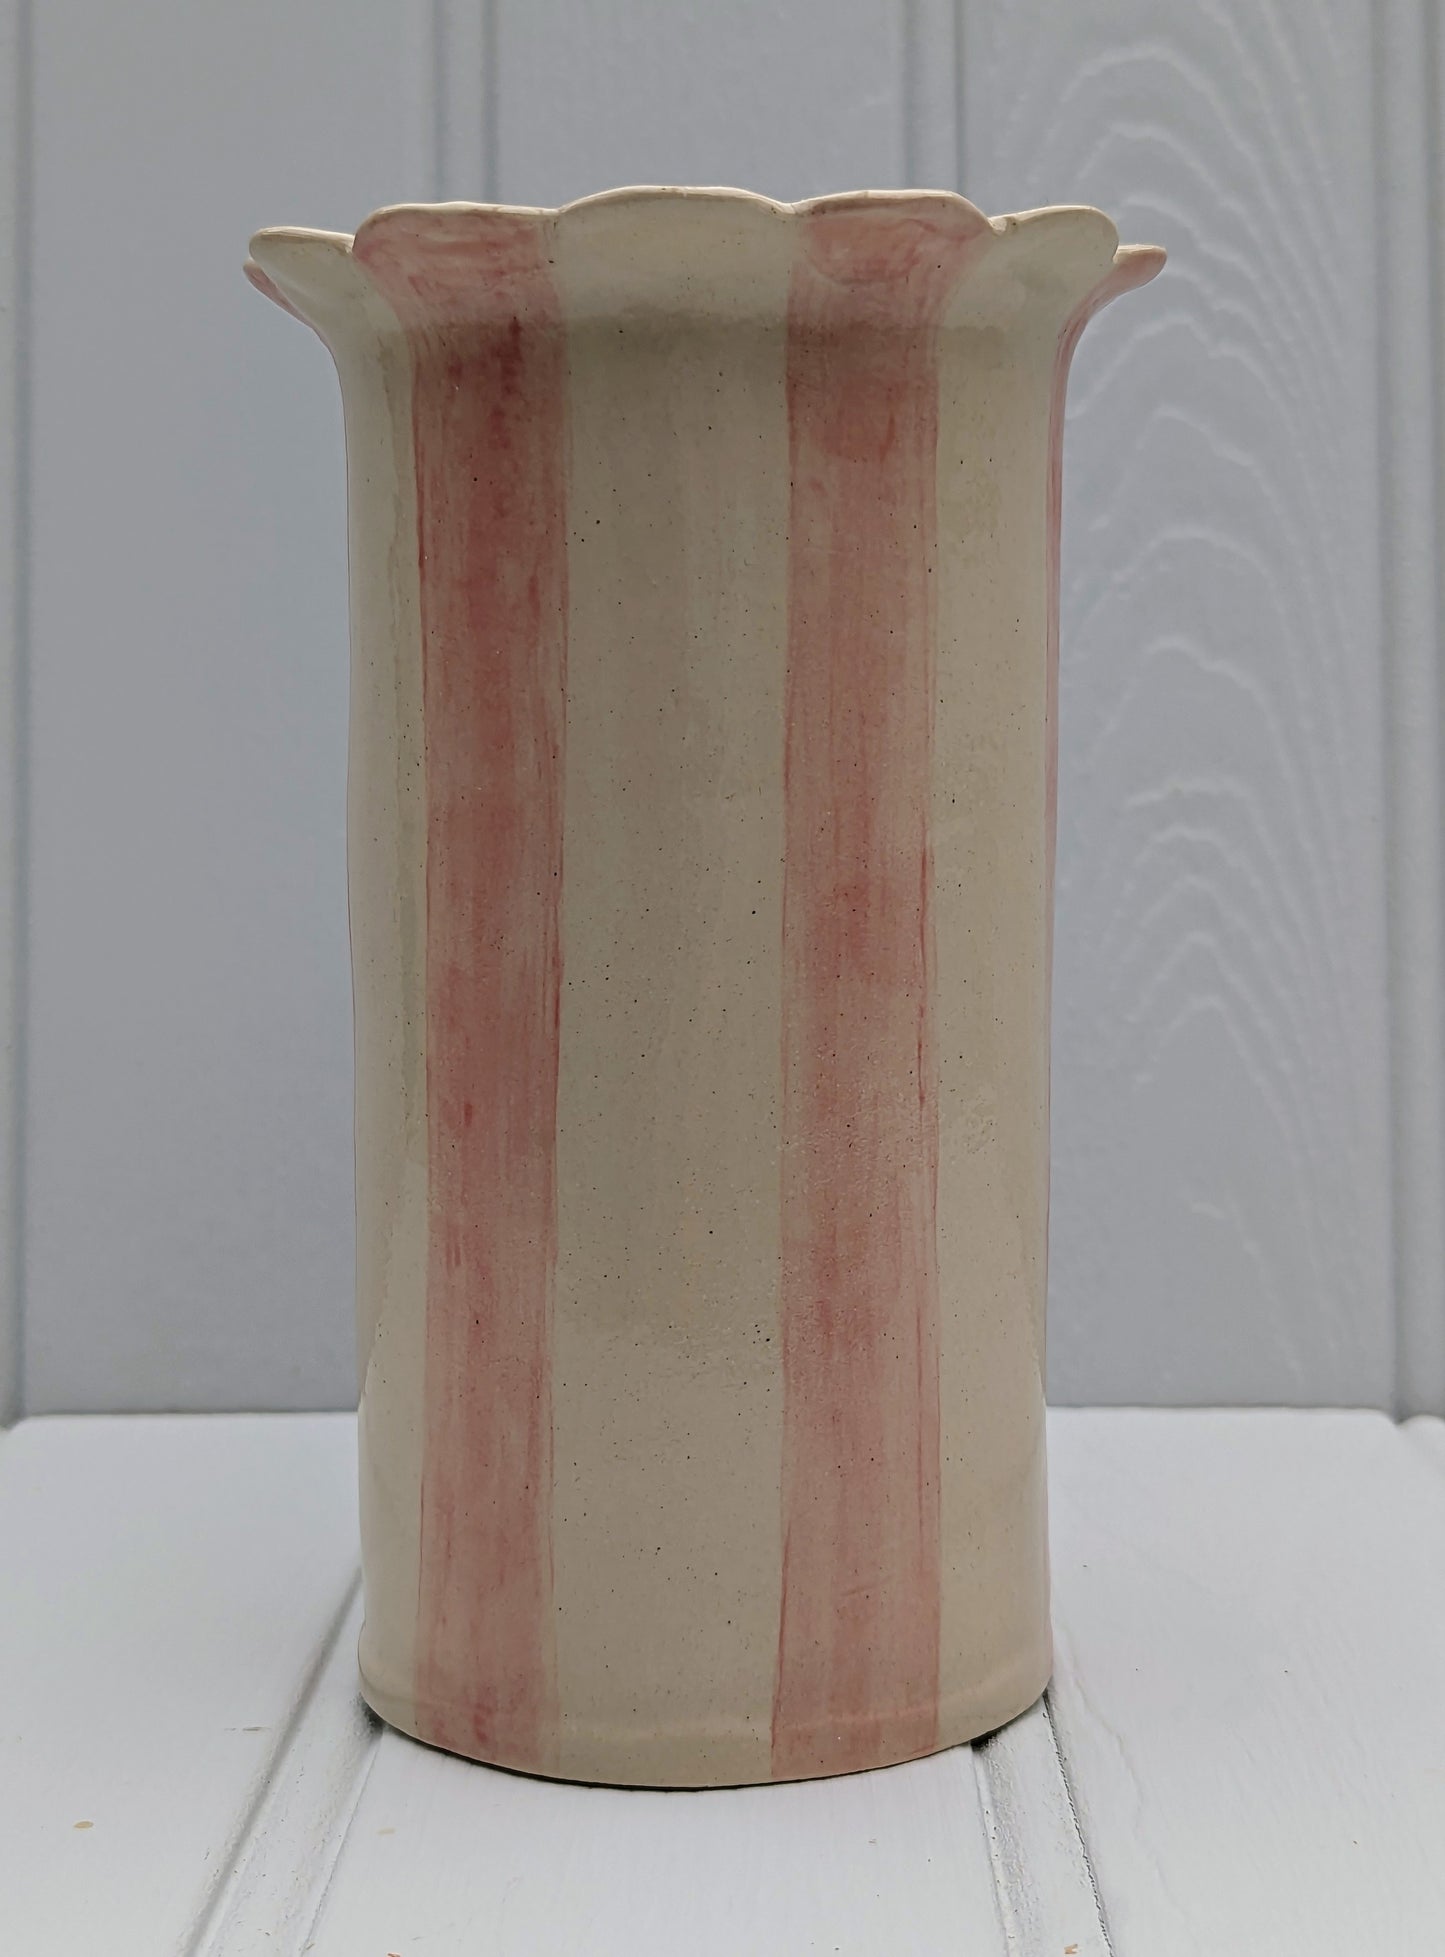 Sea Bramble Ceramics - Large Daisy vase. Handmade, Stoneware, with Sea Brambles' signature scalloped top. Shown here in close-up with pink stripes.